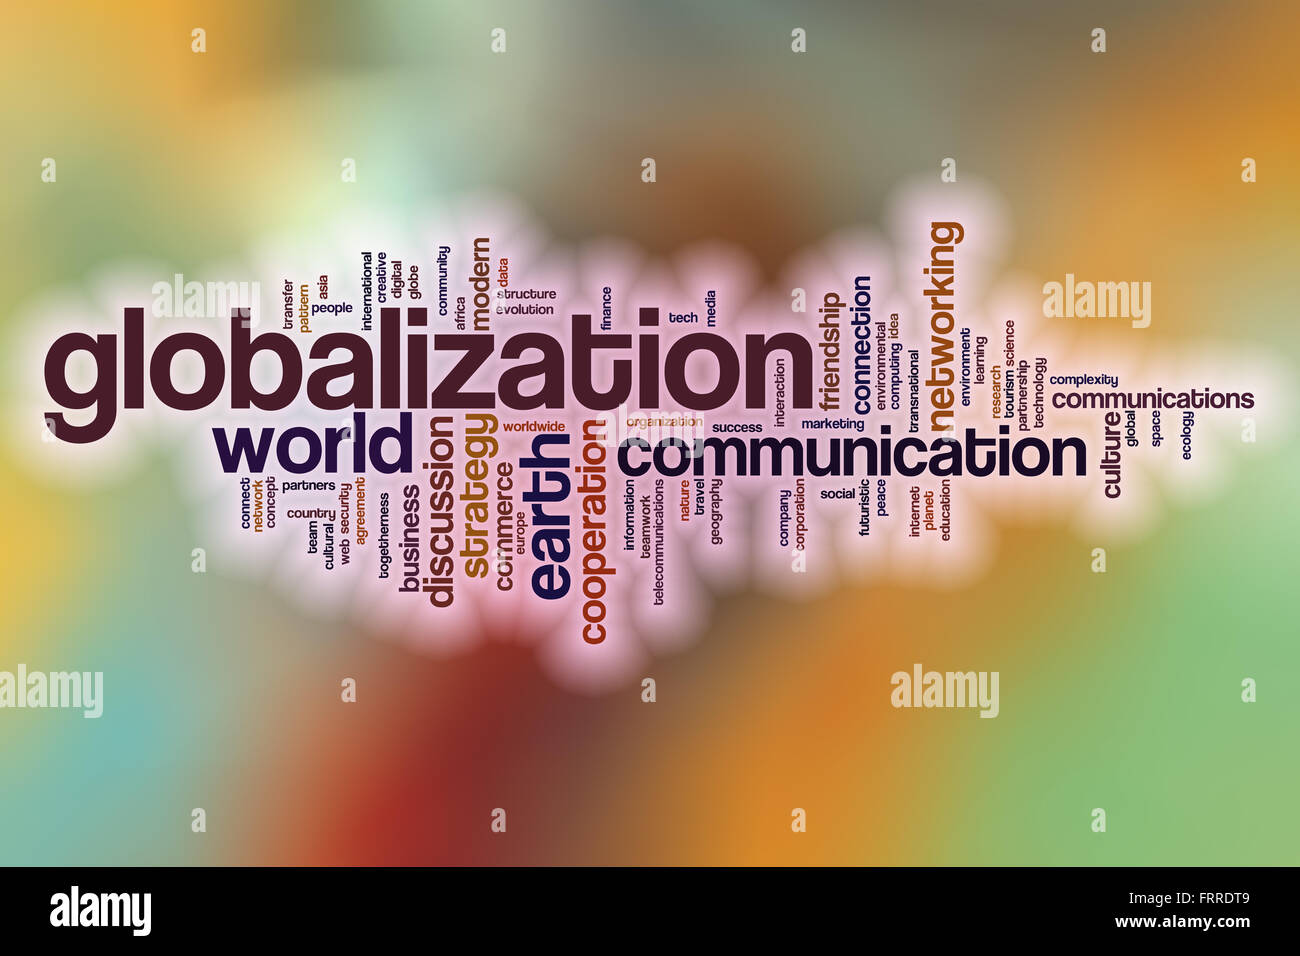 Globalization word cloud concept with abstract background Stock Photo